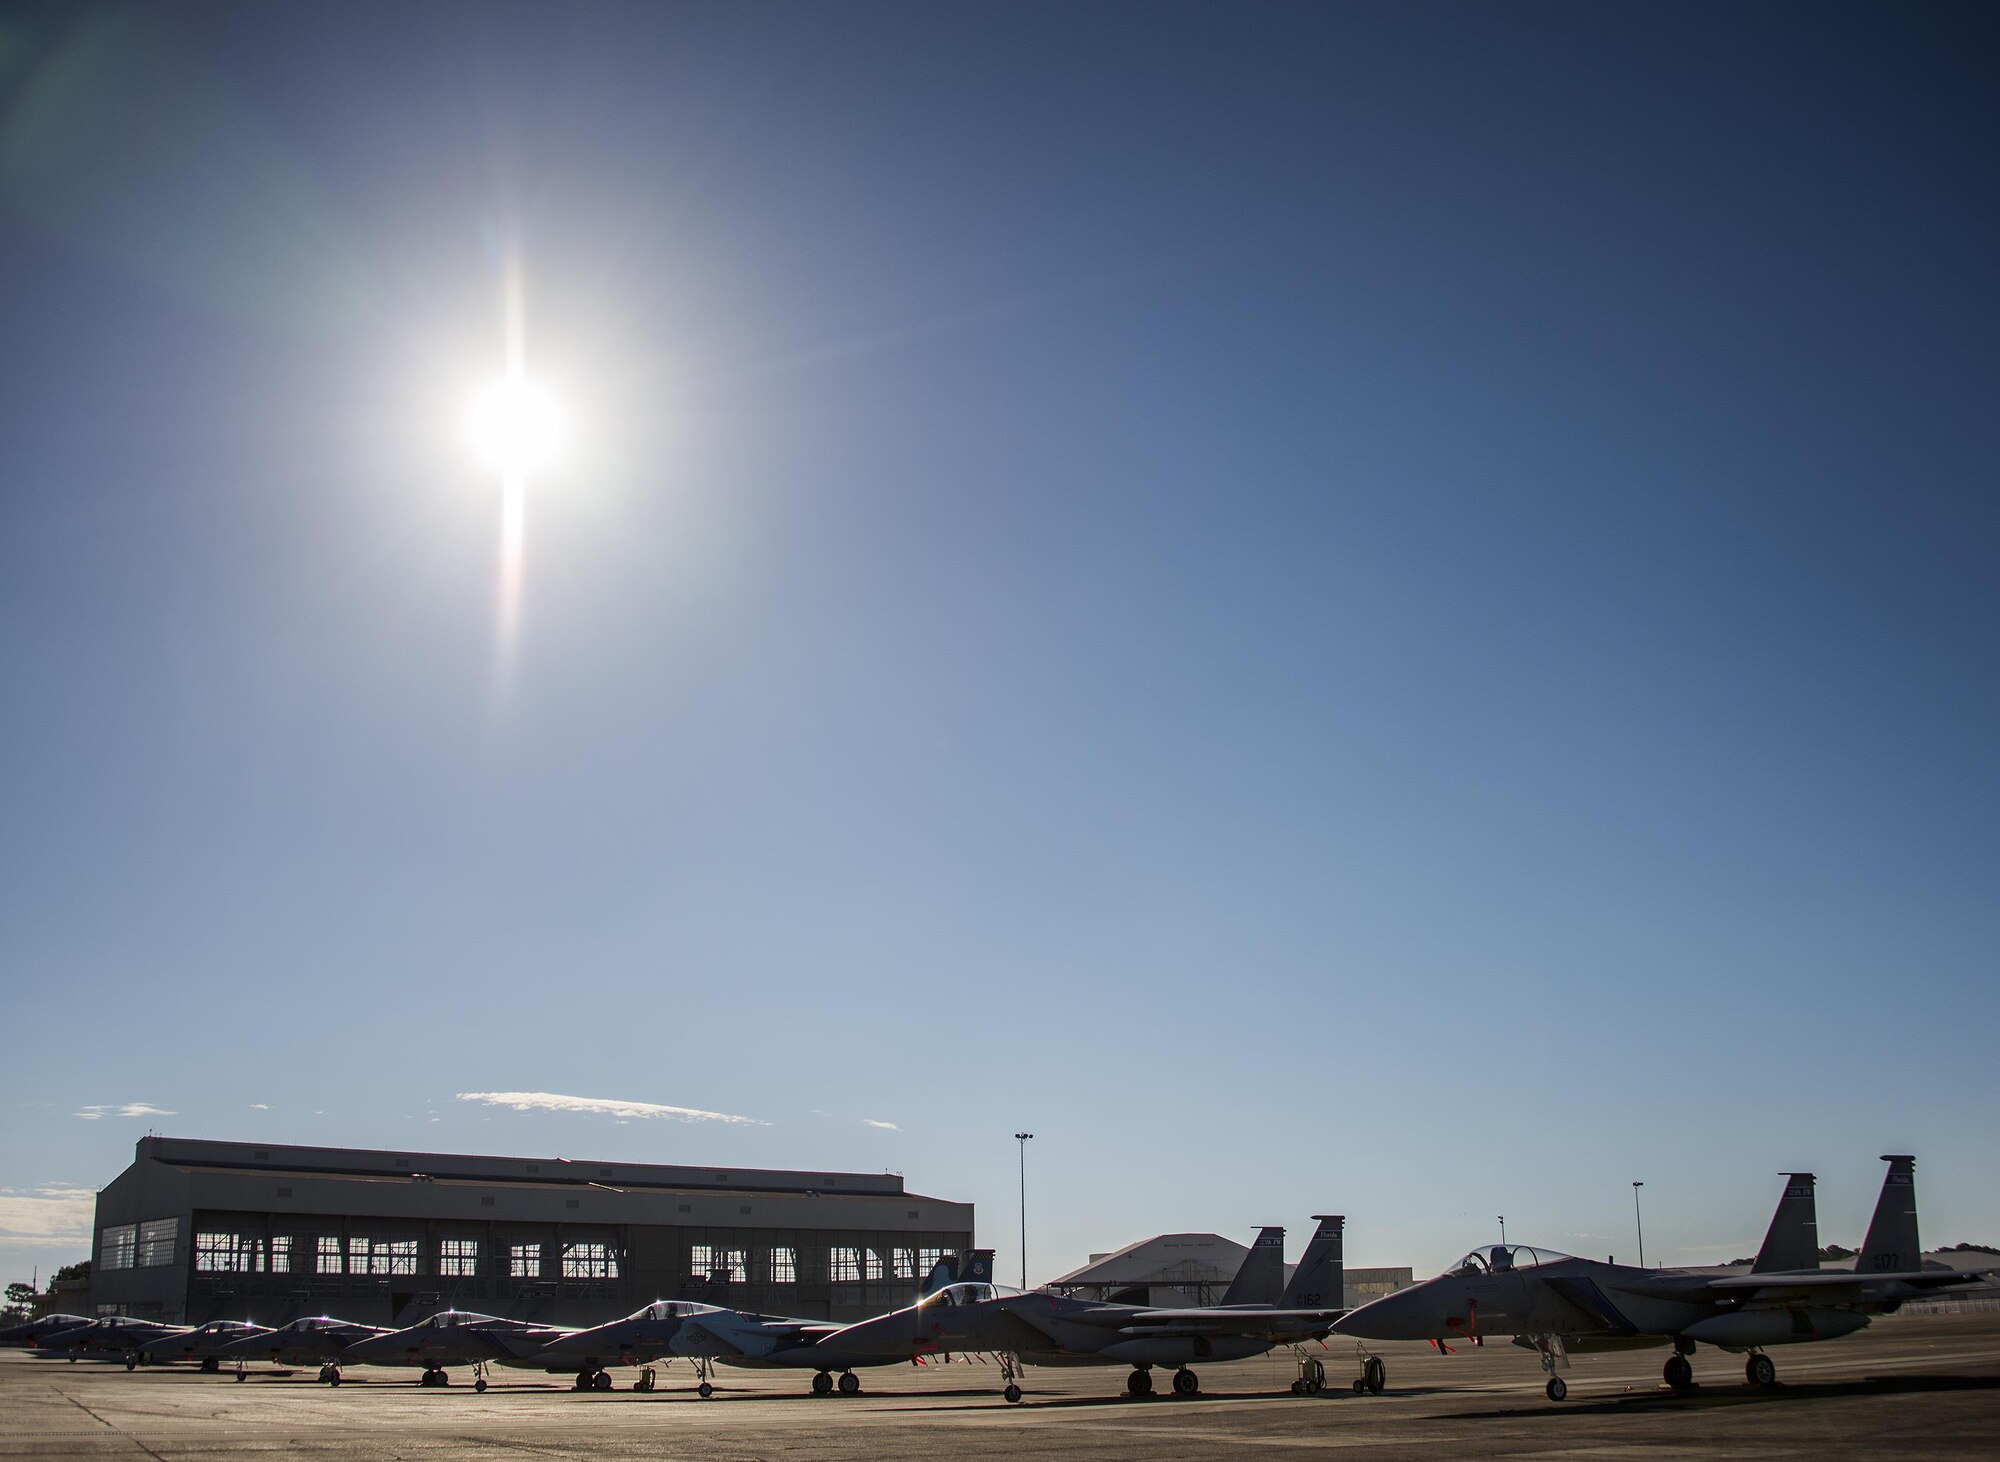 Clear skies and bright sun shines down on a row of 125th Fighter Wing F-15s from Jacksonville Fla., on the Eglin Air Force Base flightline Oct. 7.  The Air National Guard unit sent 15 aircraft to ride out Hurricane Matthew here. The Marine Fighter Attack Training Squadron-501 sent 10 F-35Bs from South Carolina to the base for sheltering as well. The 96th Aircraft Maintenance Squadron's F-15 unit and the Navy's Strike Fighter Squadron 101 provided support to the transient aircraft. (U.S. Air Force photo/Samuel King Jr.)